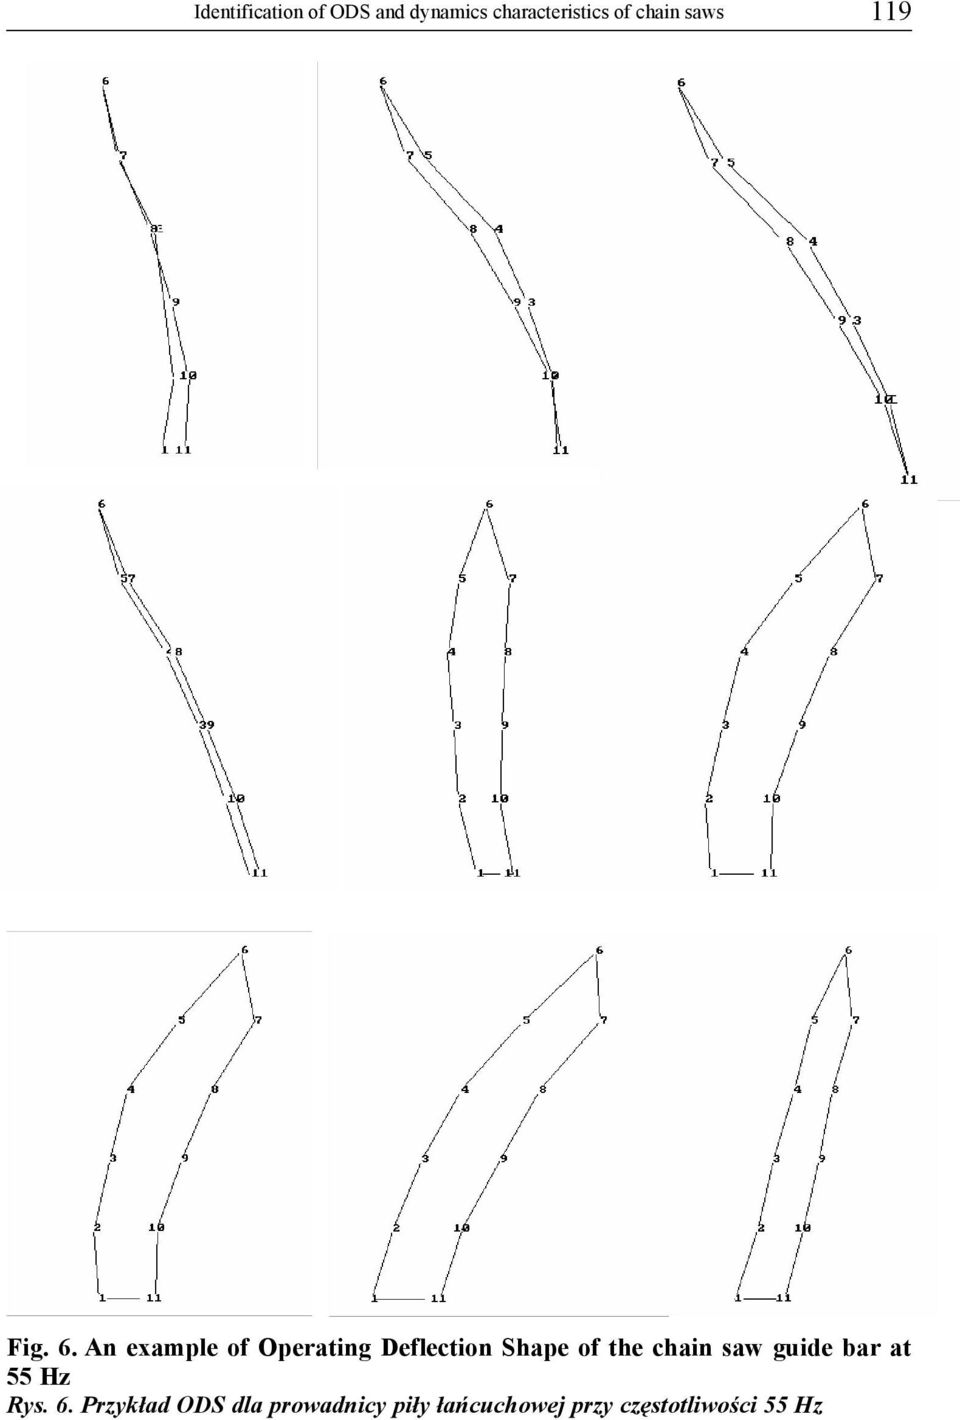 An example of Operating Deflection Shape of the chain saw